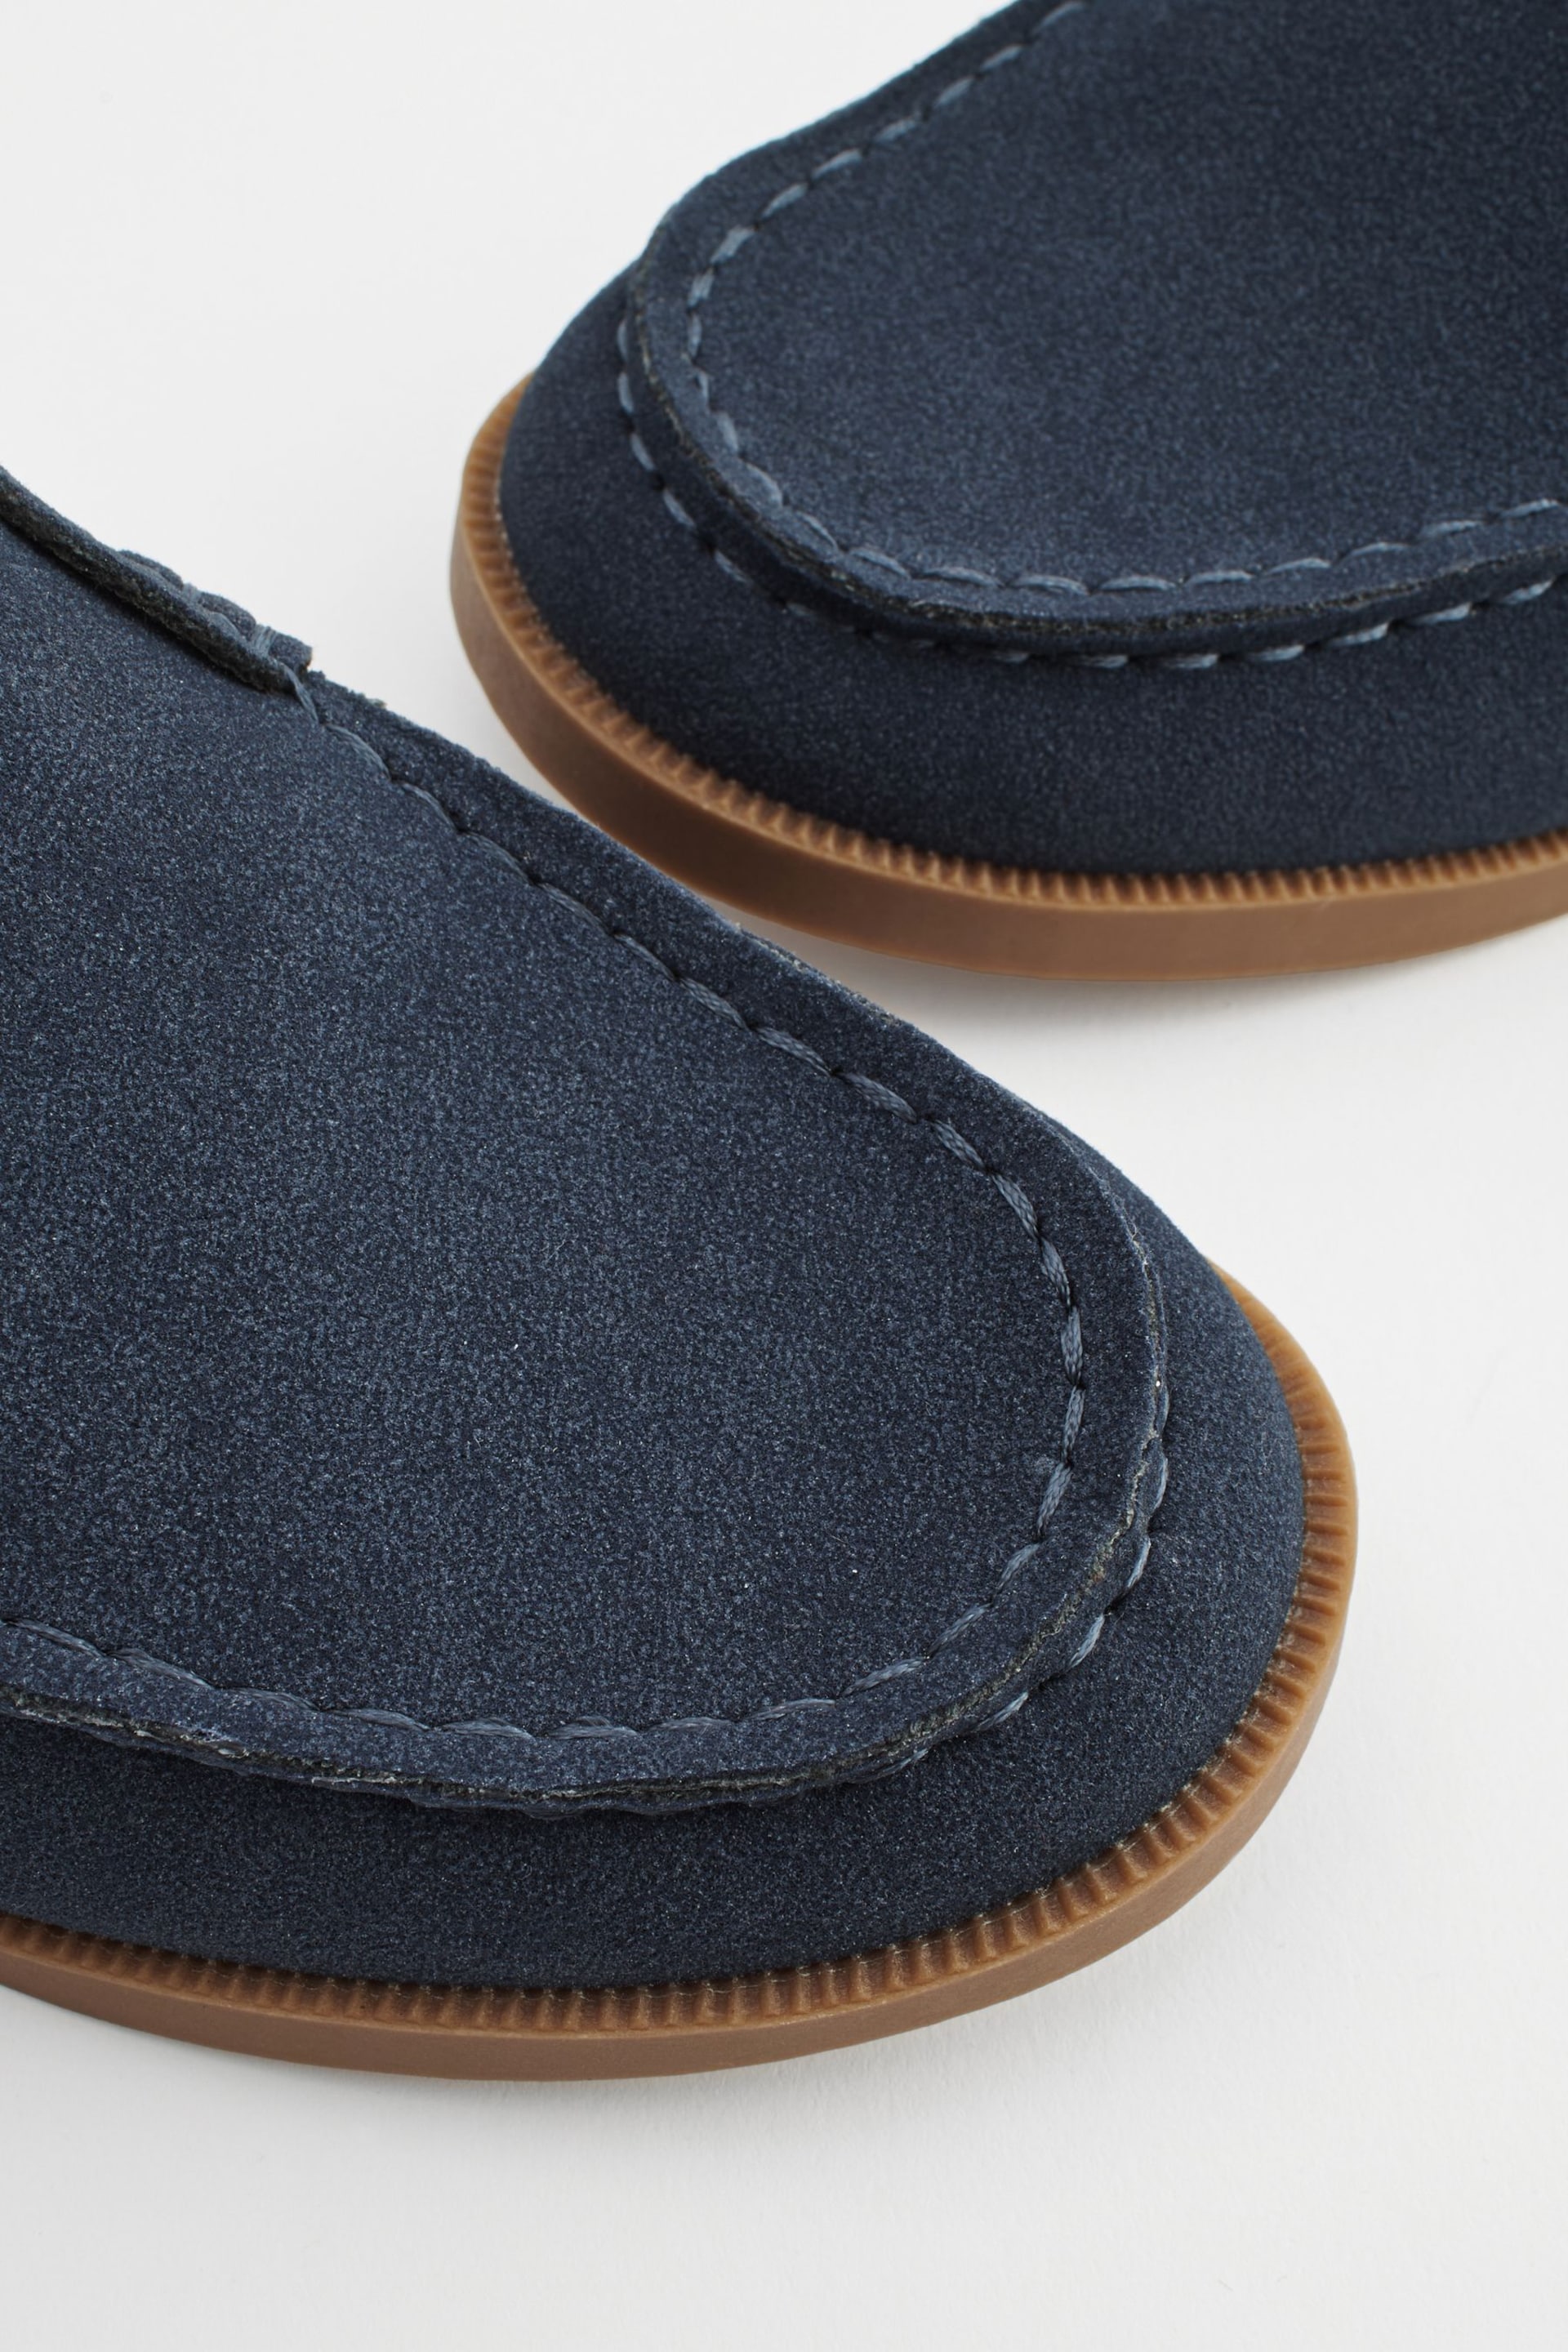 Navy Loafers - Image 5 of 7